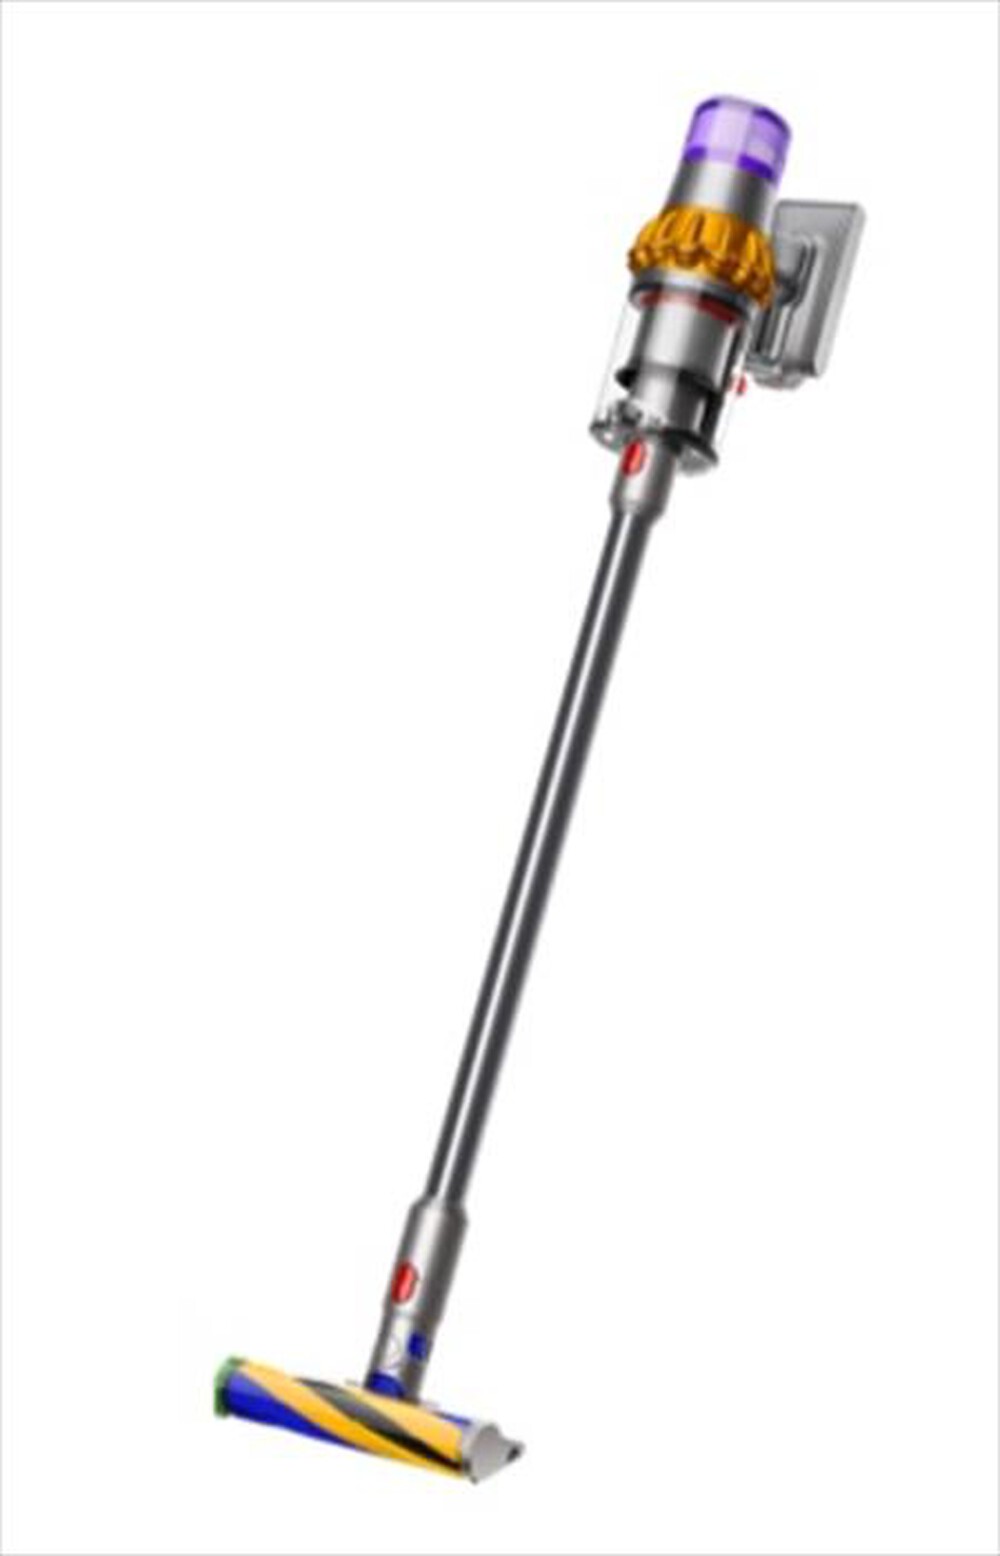 "DYSON - V15 DETECT ABSOLUTE - "